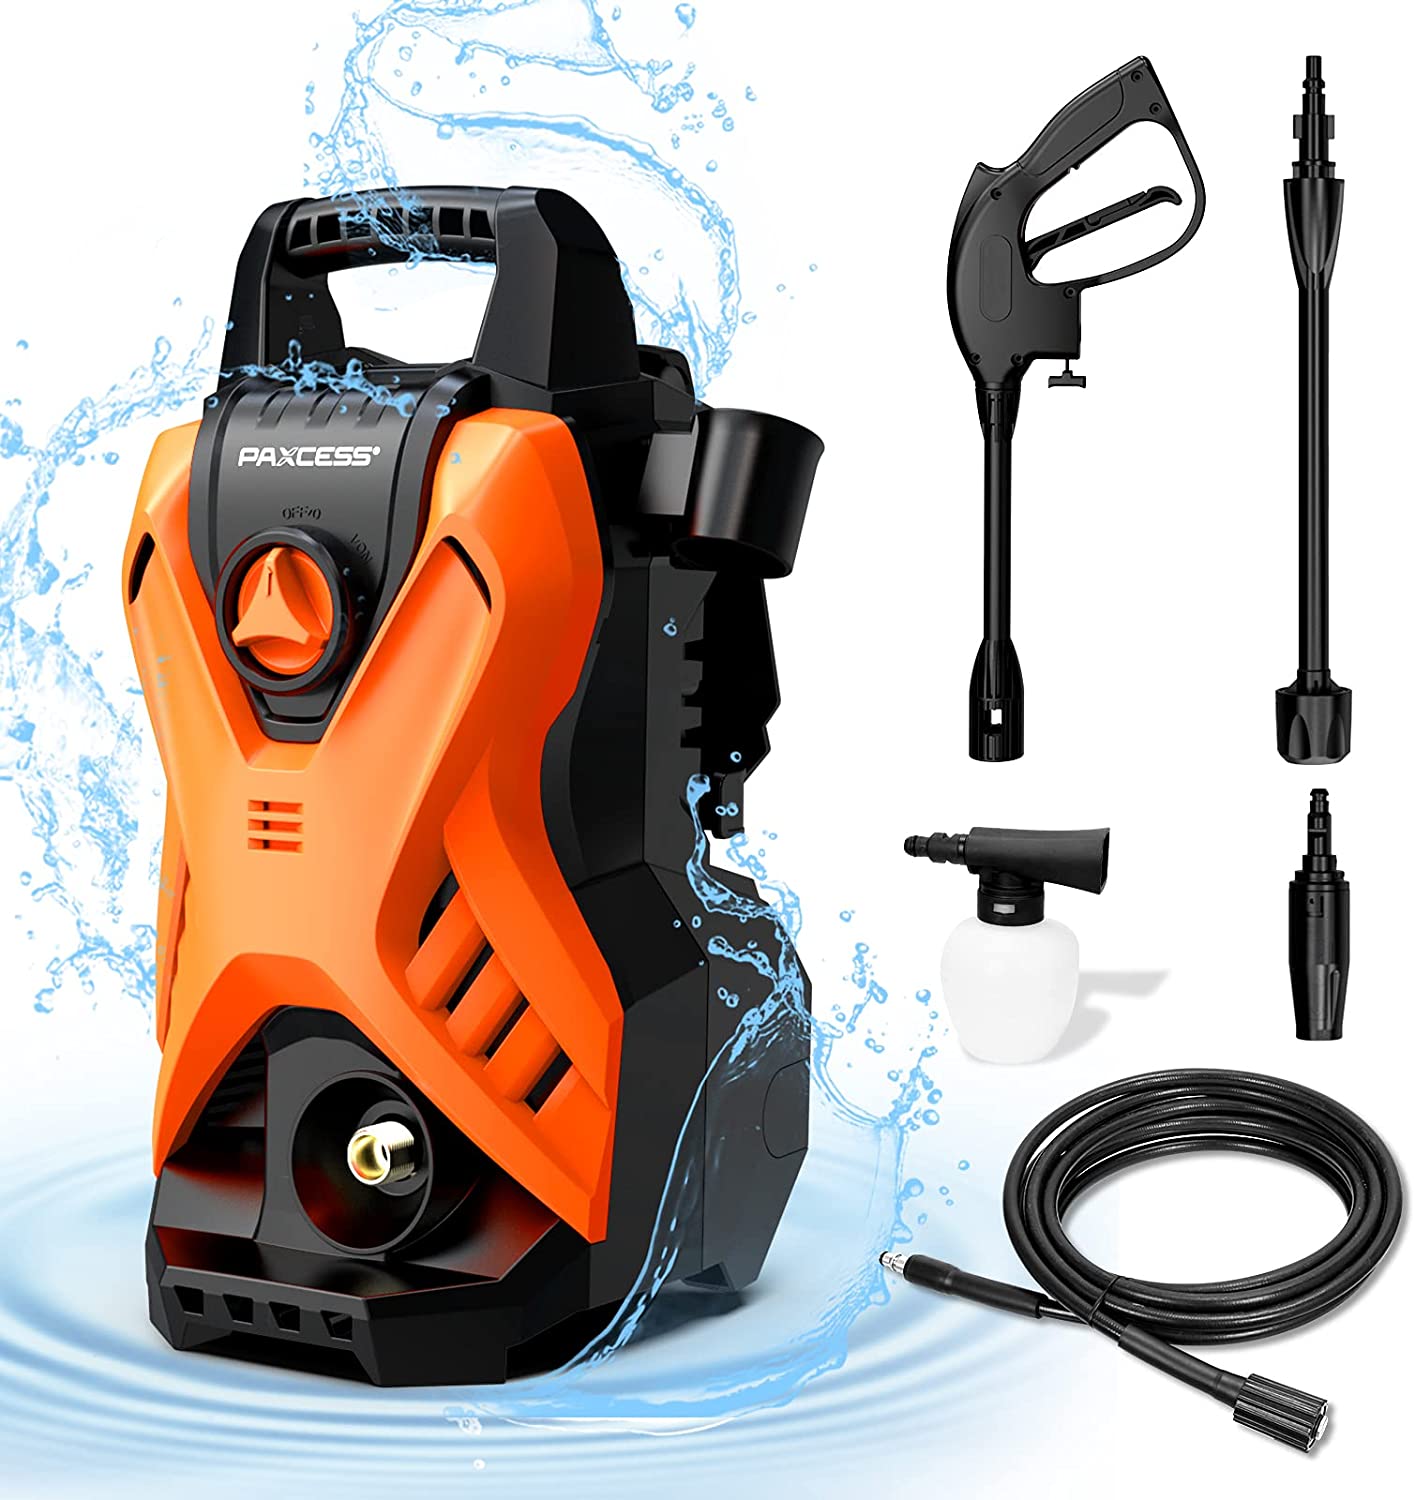 Paxcess Portable Pressure Car Washer